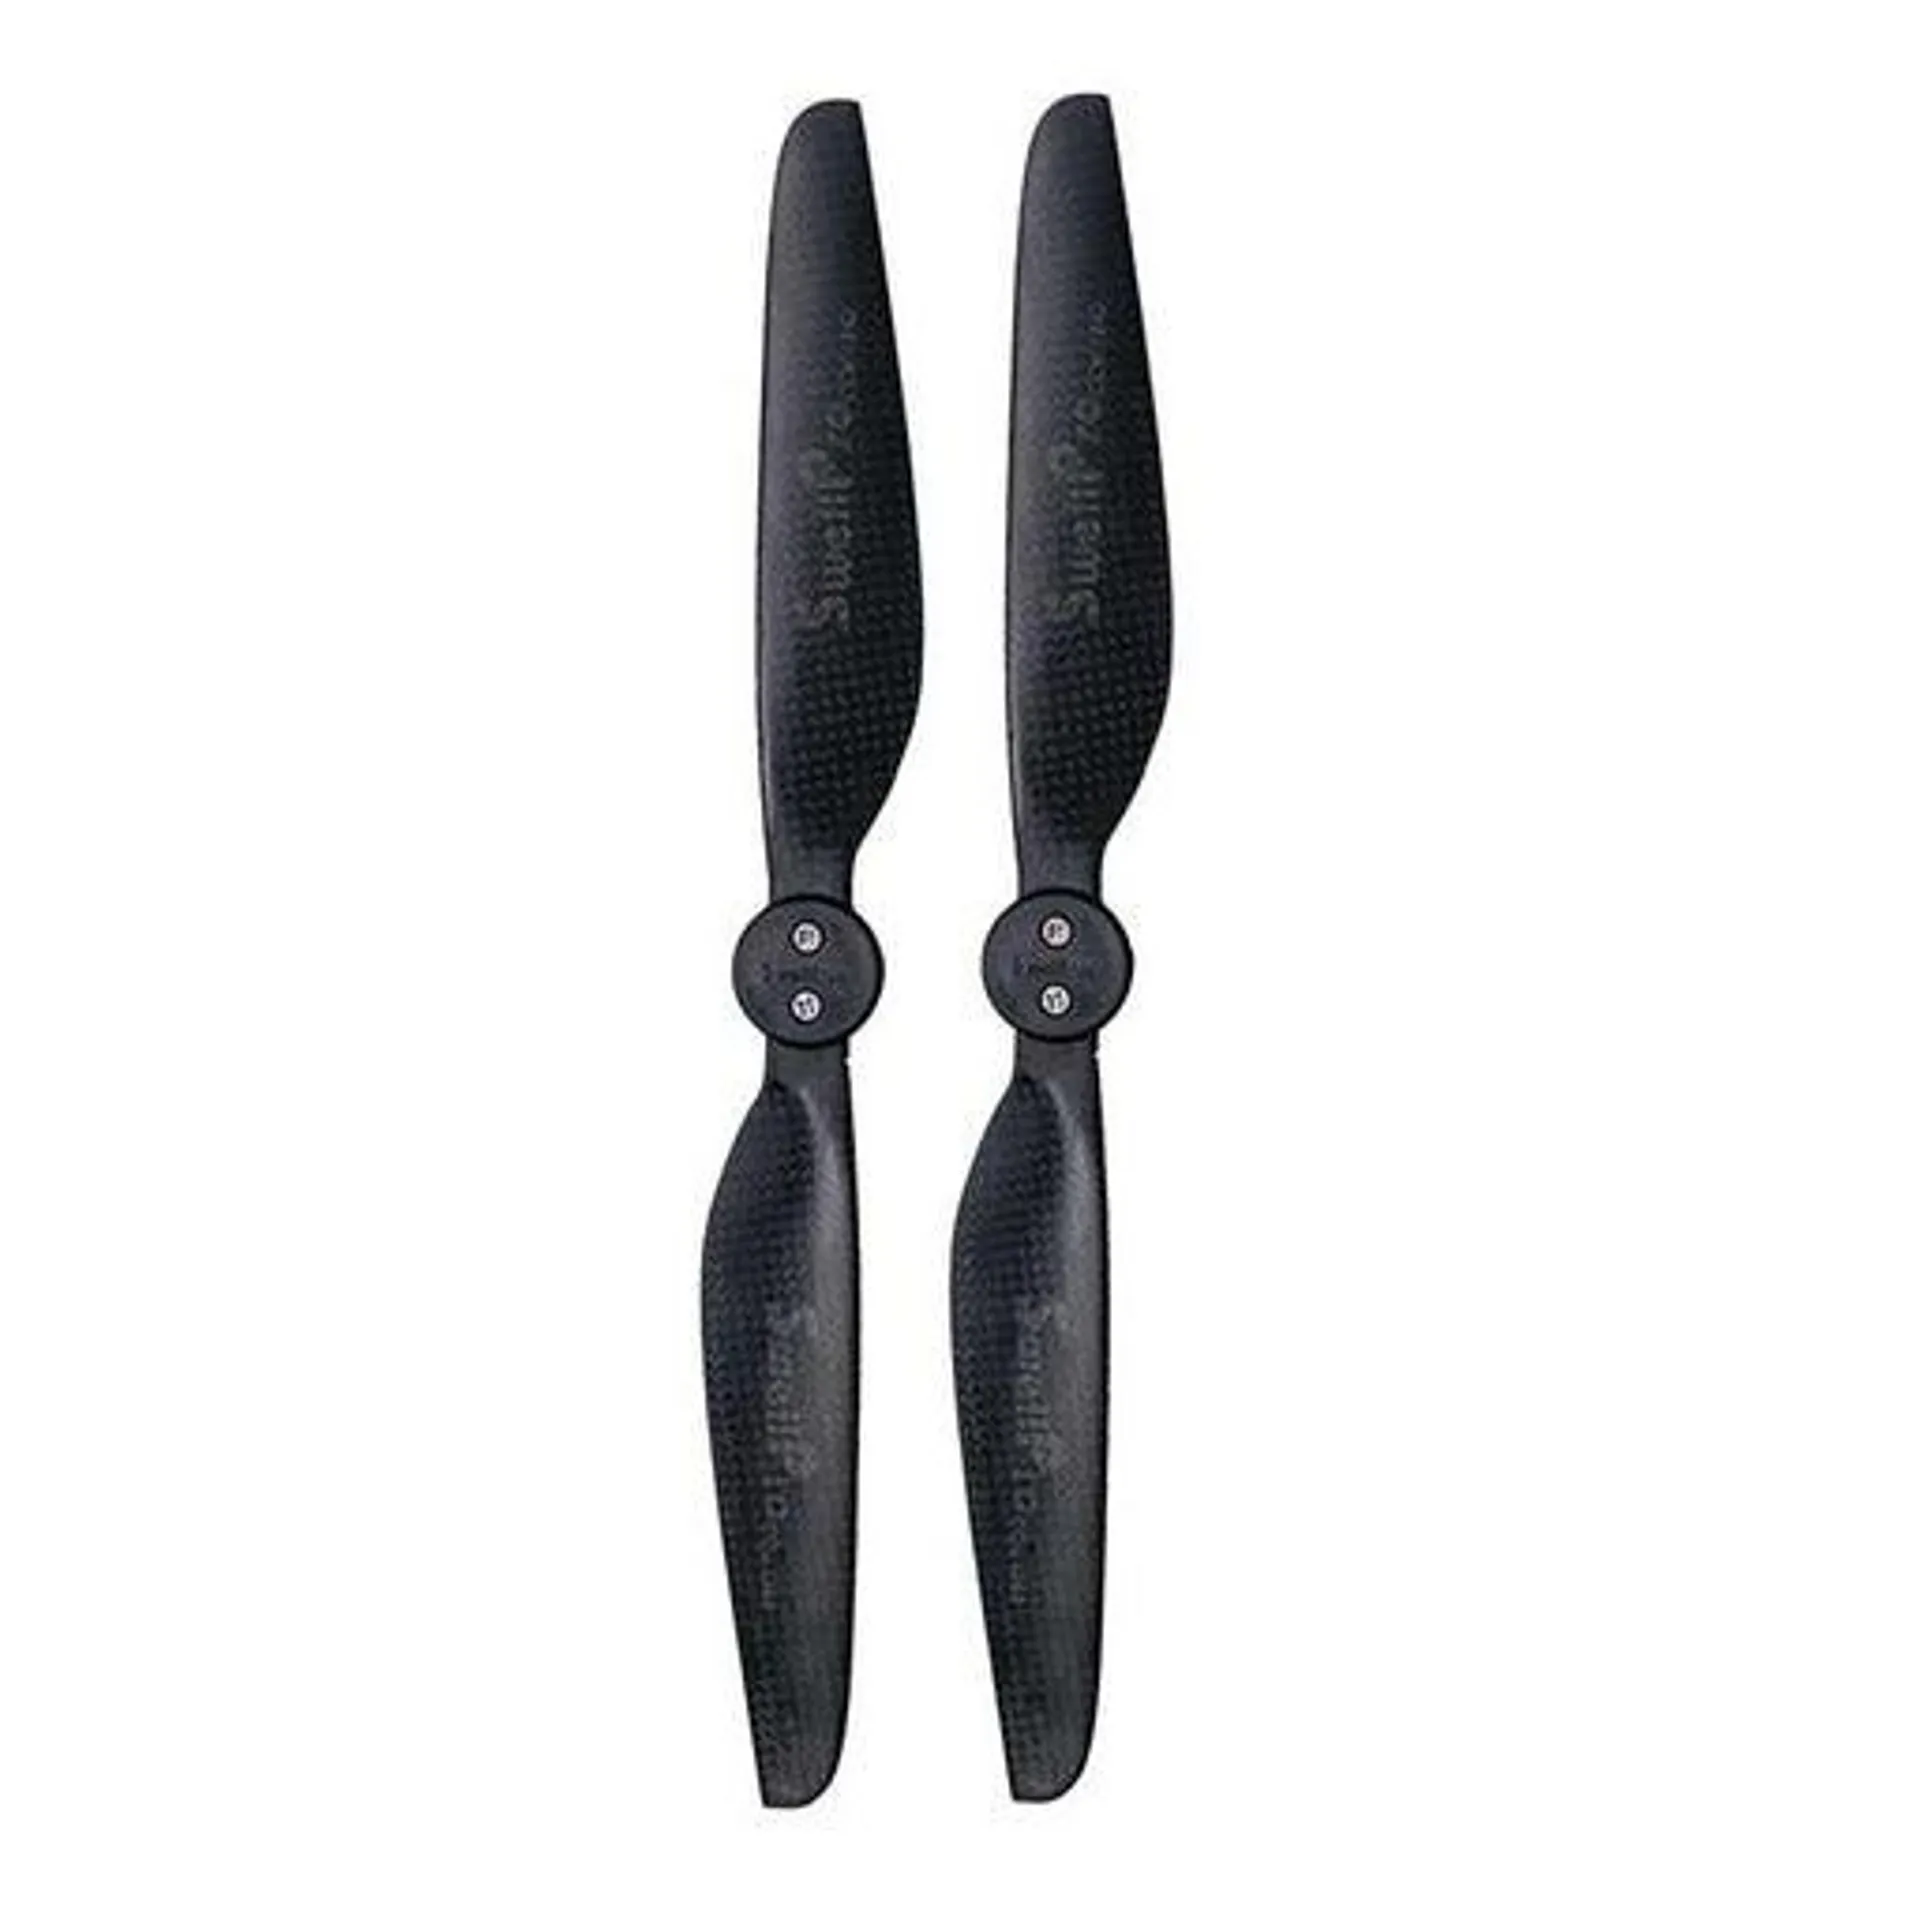 Spare Propellers for Splashdrone FD1, SD4, 3/3+ Pair (High Performance Original)